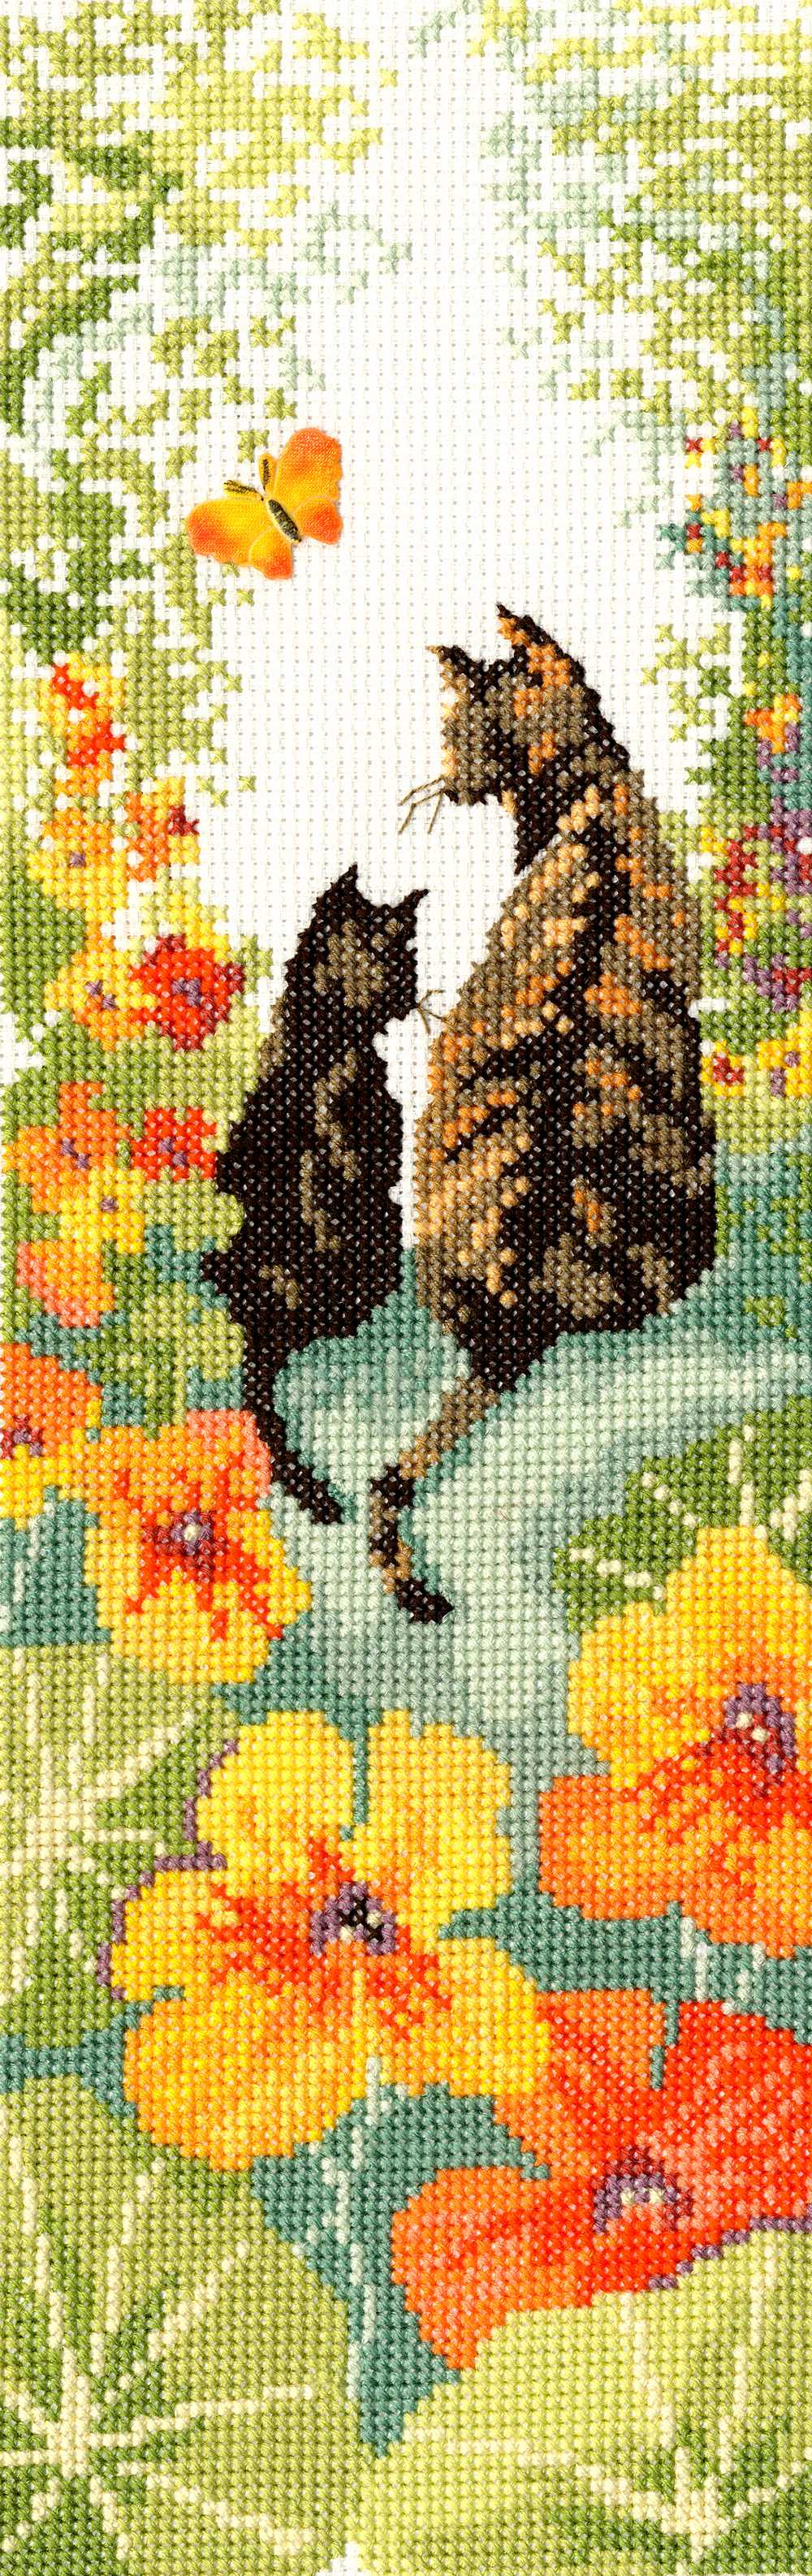 Follow Me 1 Cats Cross Stitch Kit From Bothy Threads